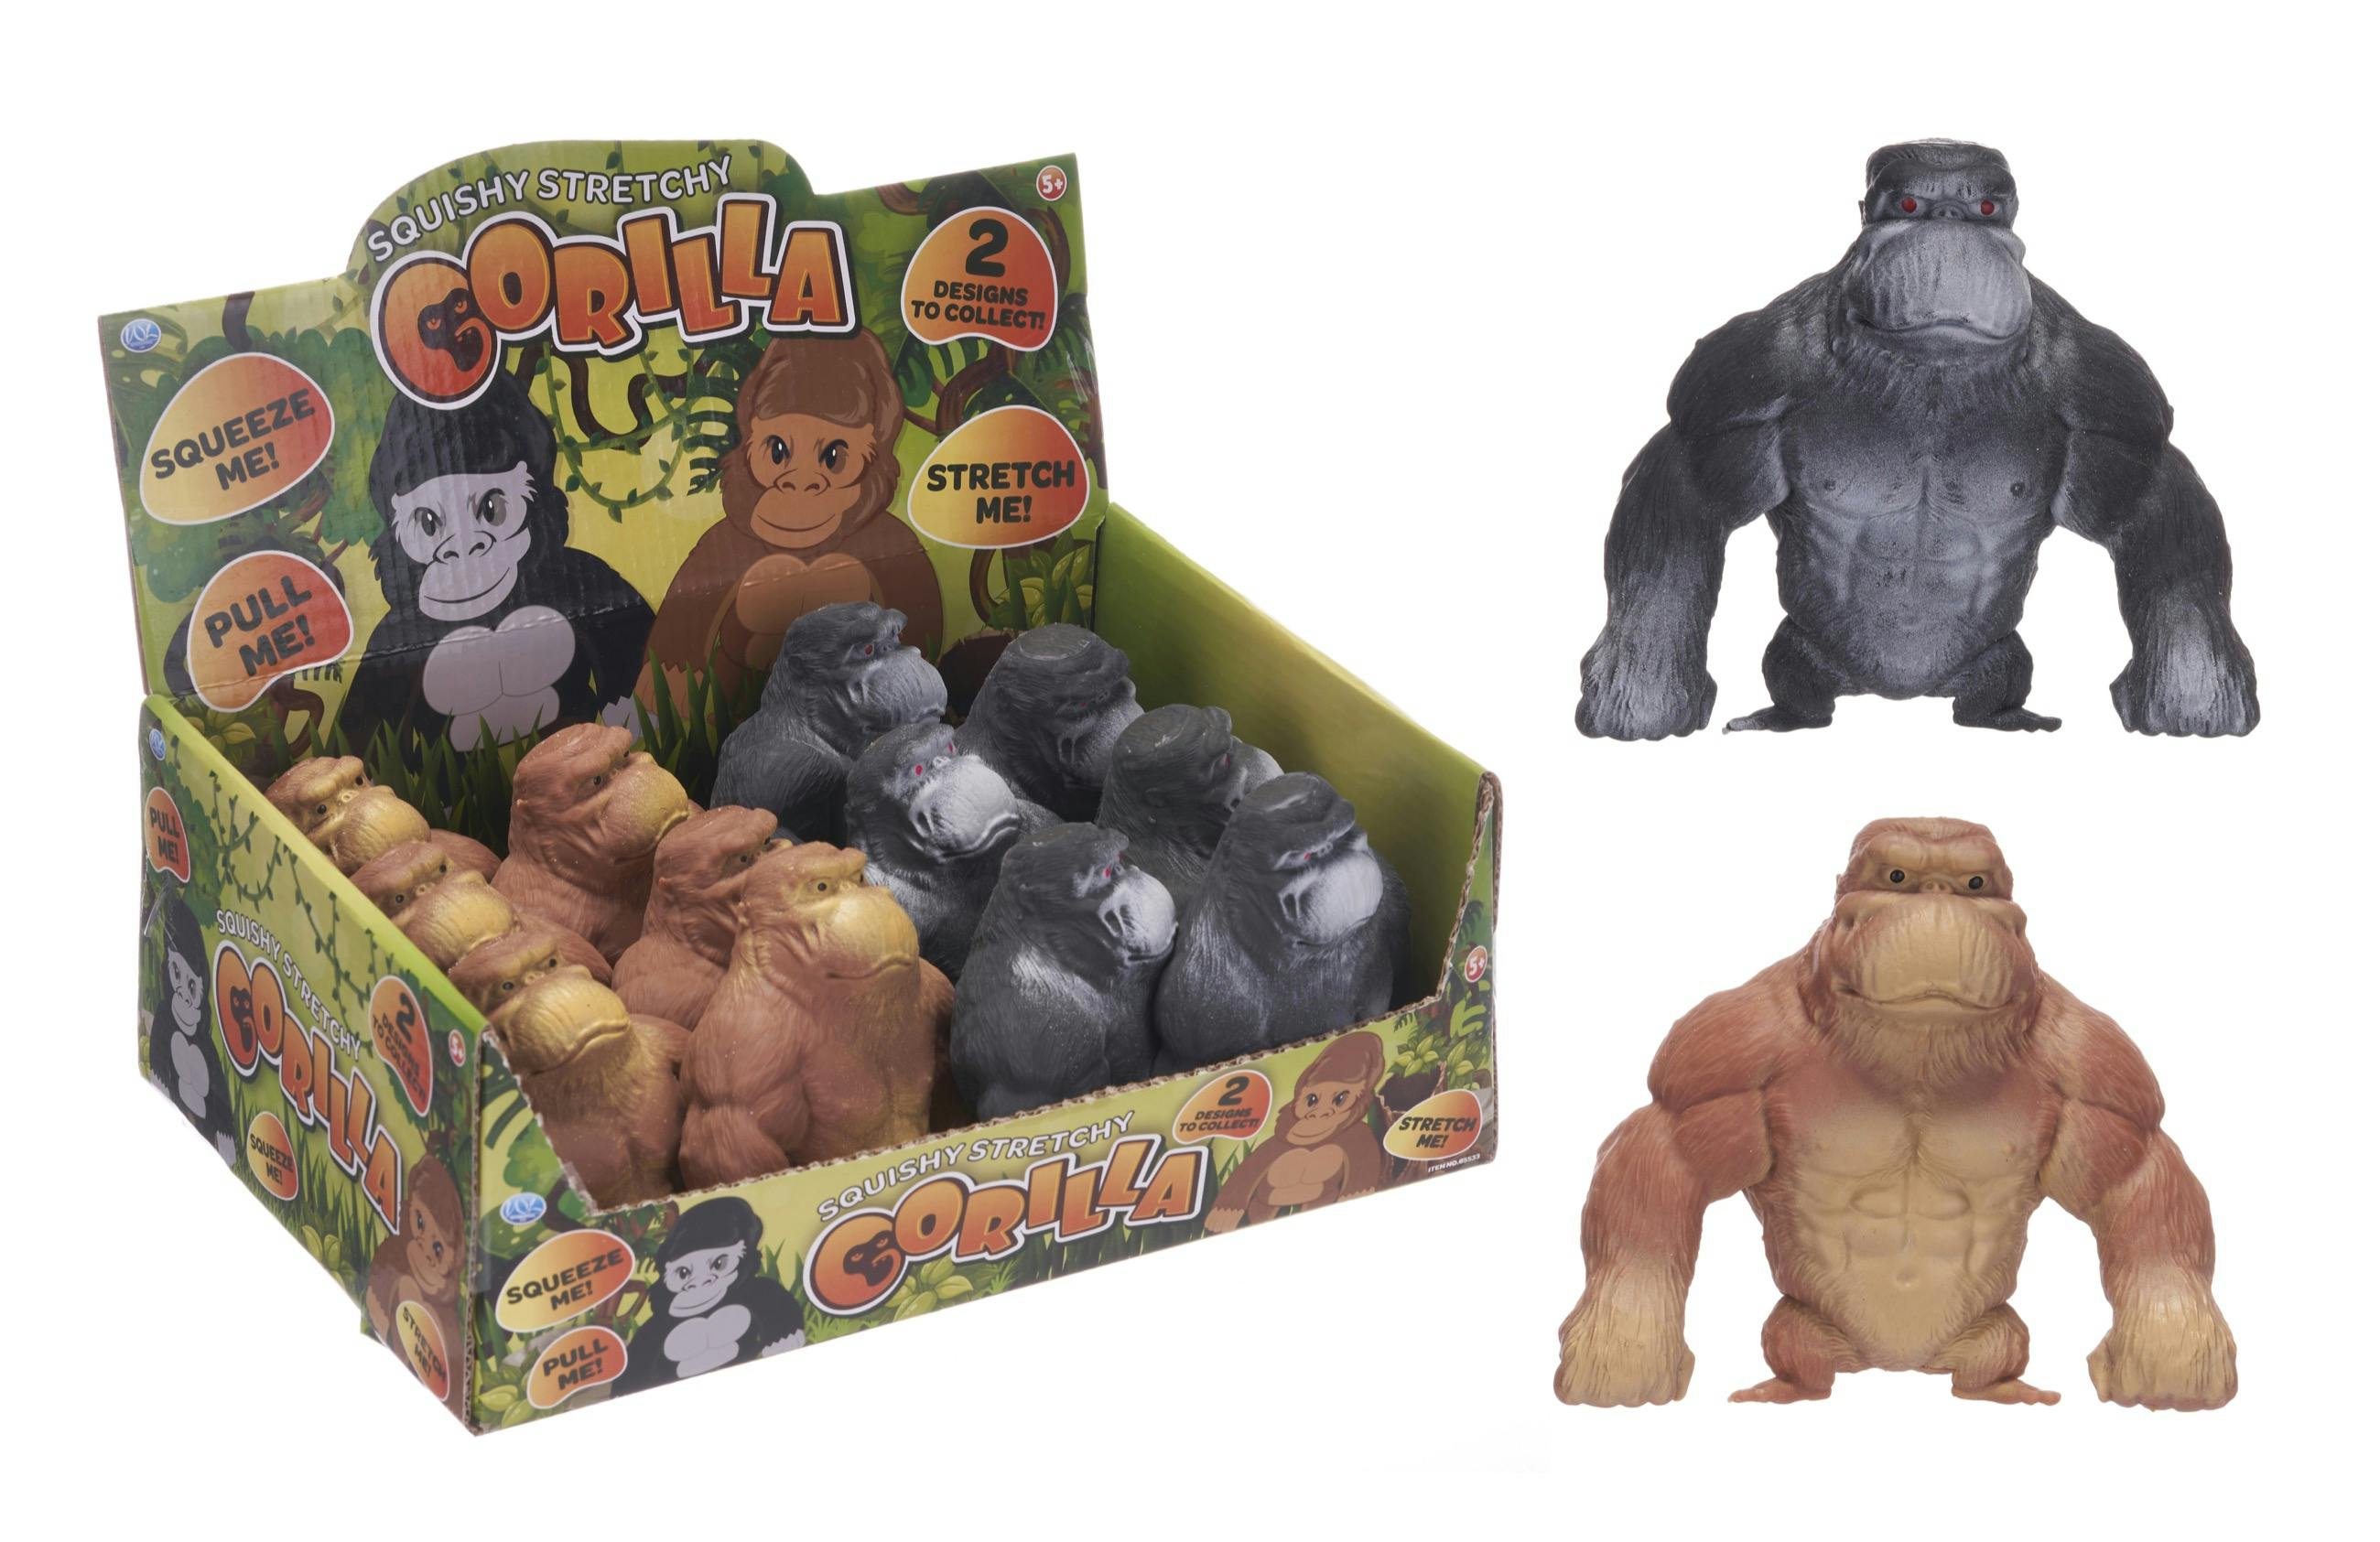 Product - Squishy Atretchy Gorilla 2 Ass